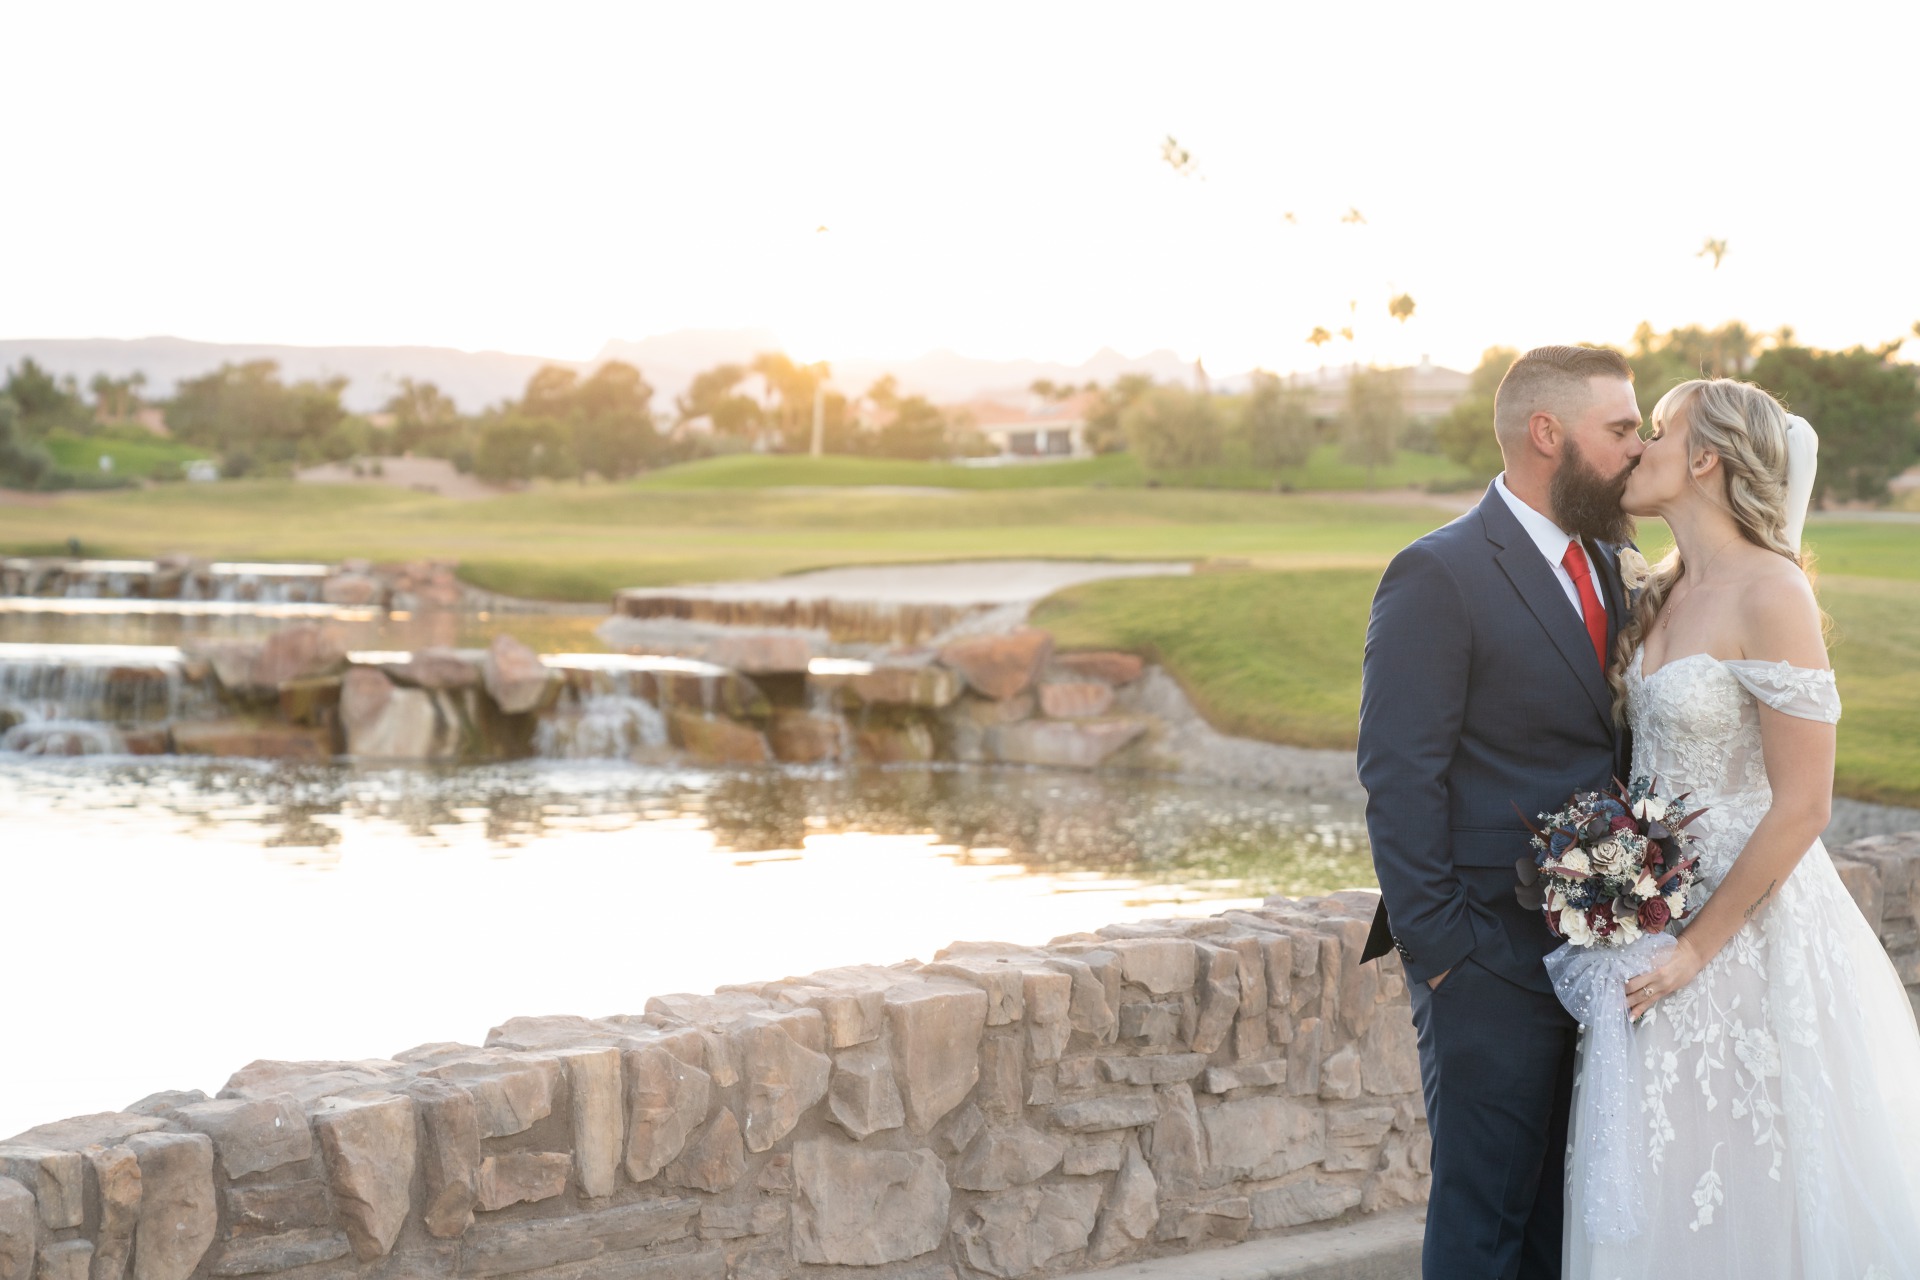 You’ll be Inspired by this Red, White, and Blue Wedding at Canyon Gate Country Club